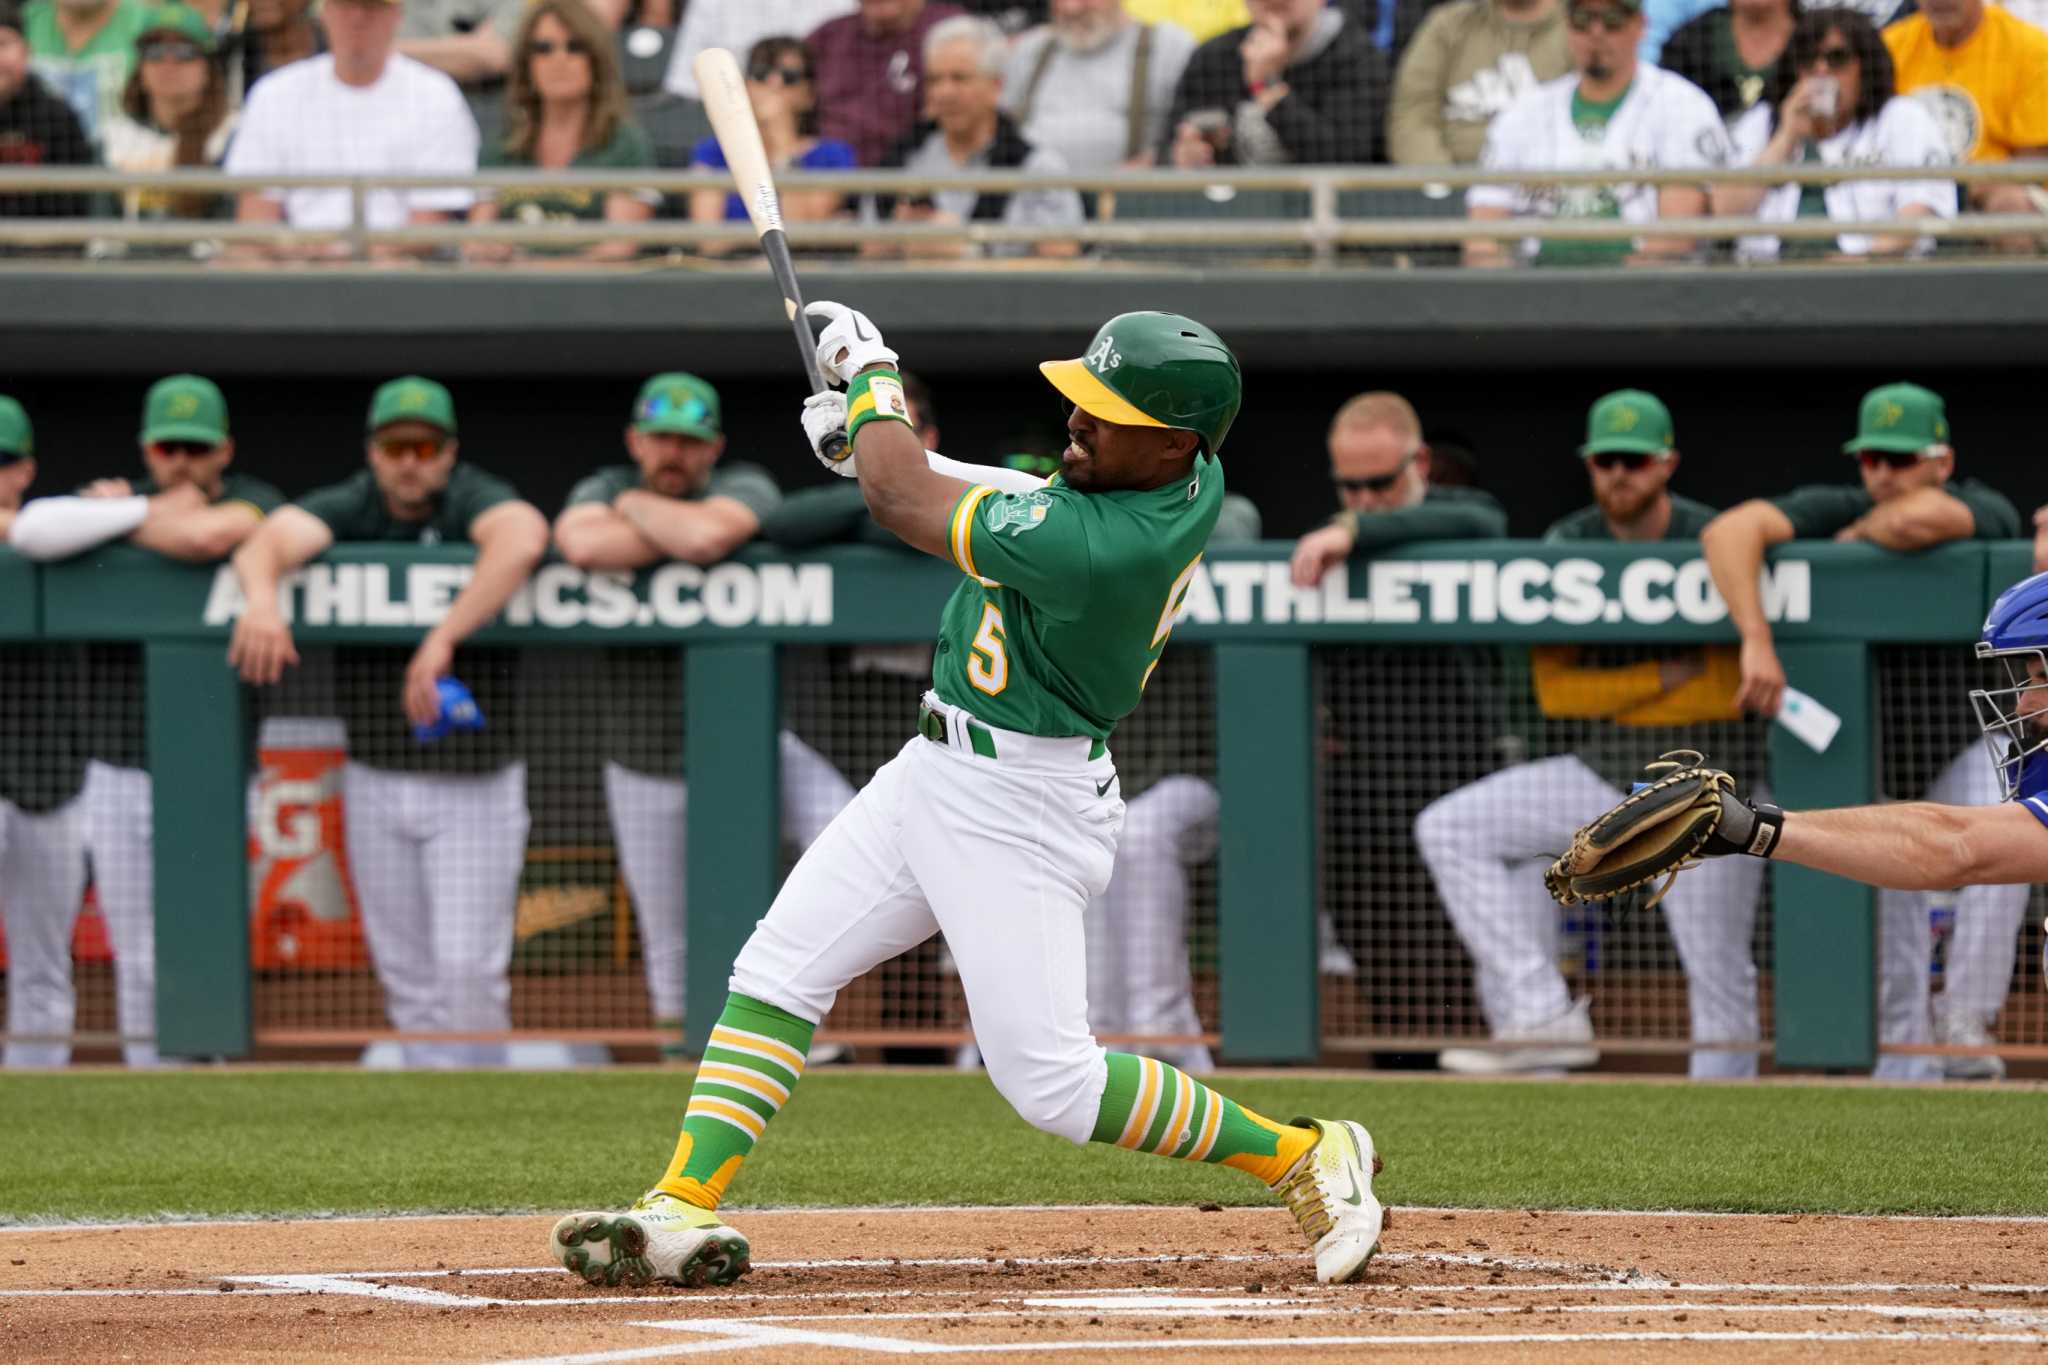 A's Tony Kemp eyes 'complete' season after 2022 swing changes